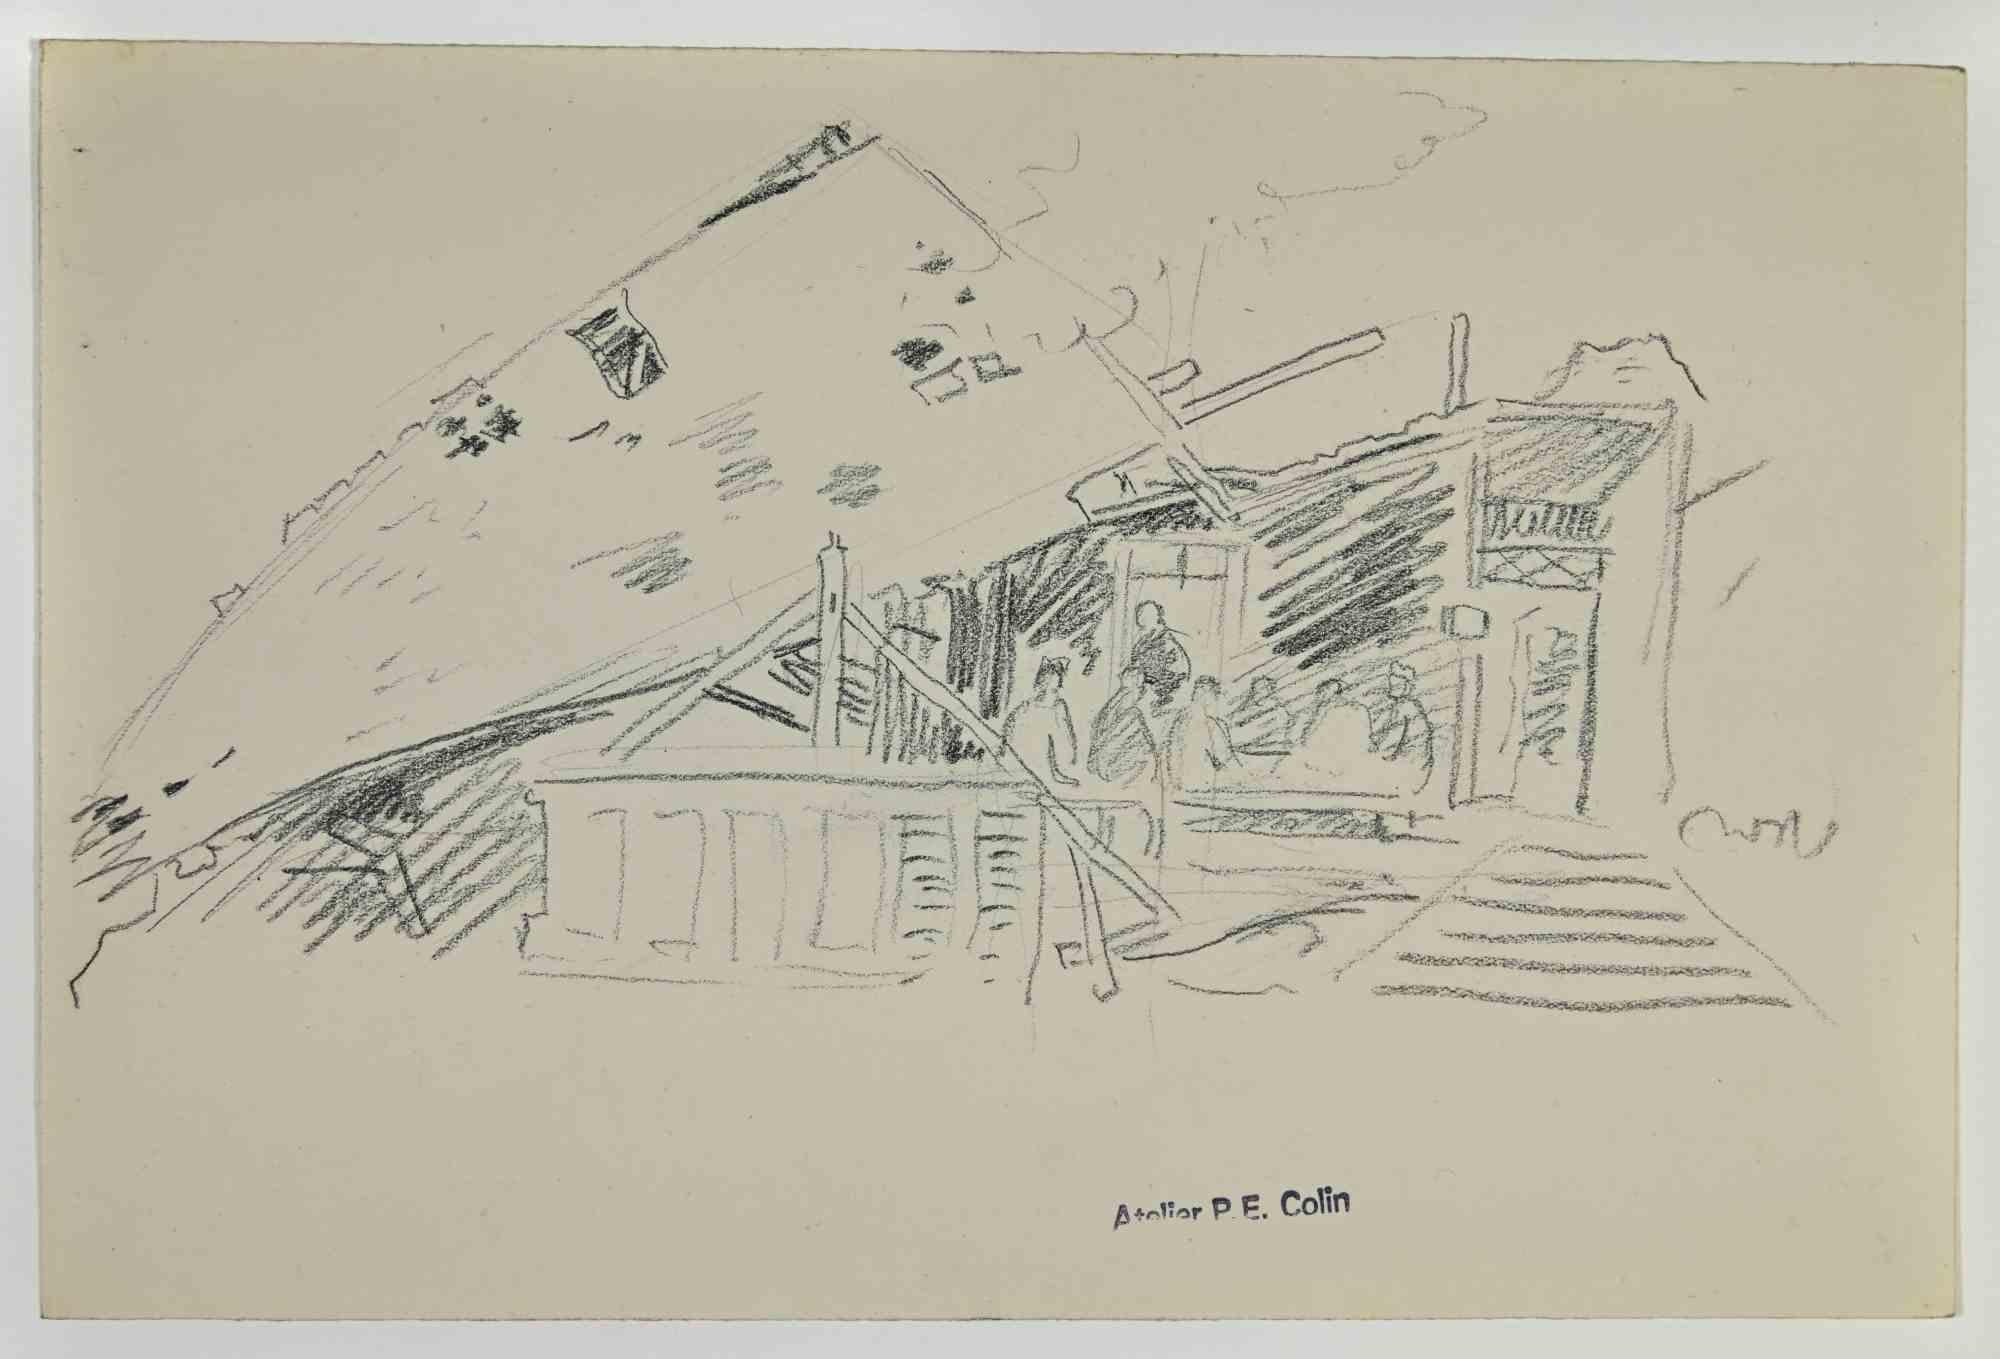 Soldiers Resting is an drawing realized by Paul Emile Colin in the 20th Century.

Carbon Pencil on ivory-colored paper

Stamped on the lower.

Good conditions with slight foxing.

The artwork is realized through deft expressive strokes.